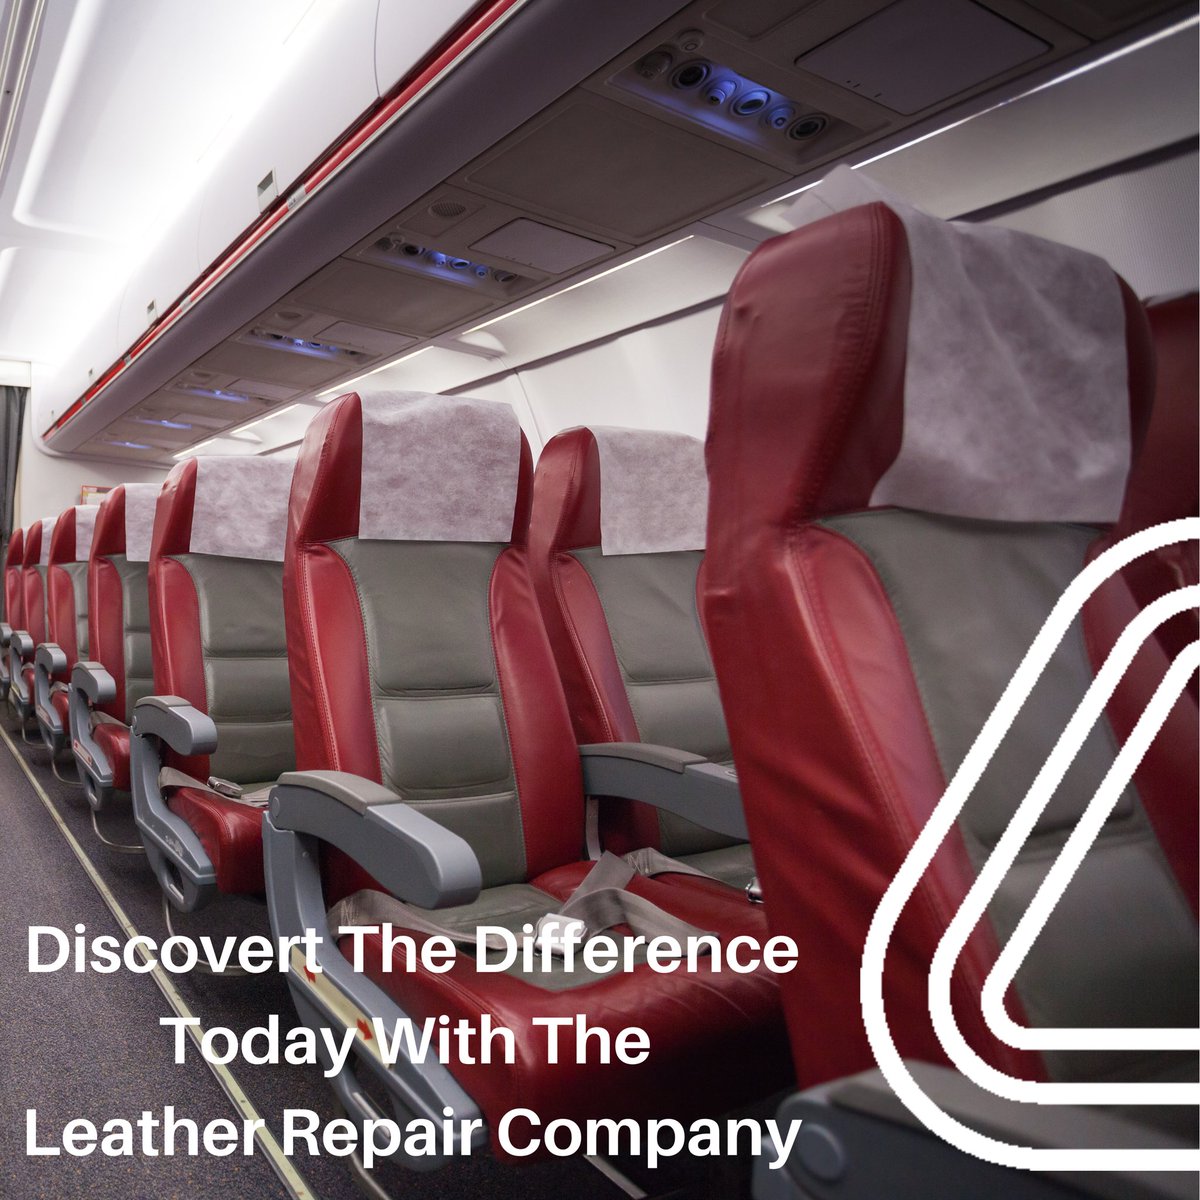 ✈️🌱 Go Green Above the Clouds! 🌿 Discover Our Eco-Friendly Professional Repair Products for Keeping Your Aircraft Interior in Great Shape. #GreenAviation #EcoFriendlyRepair #AircraftInterior